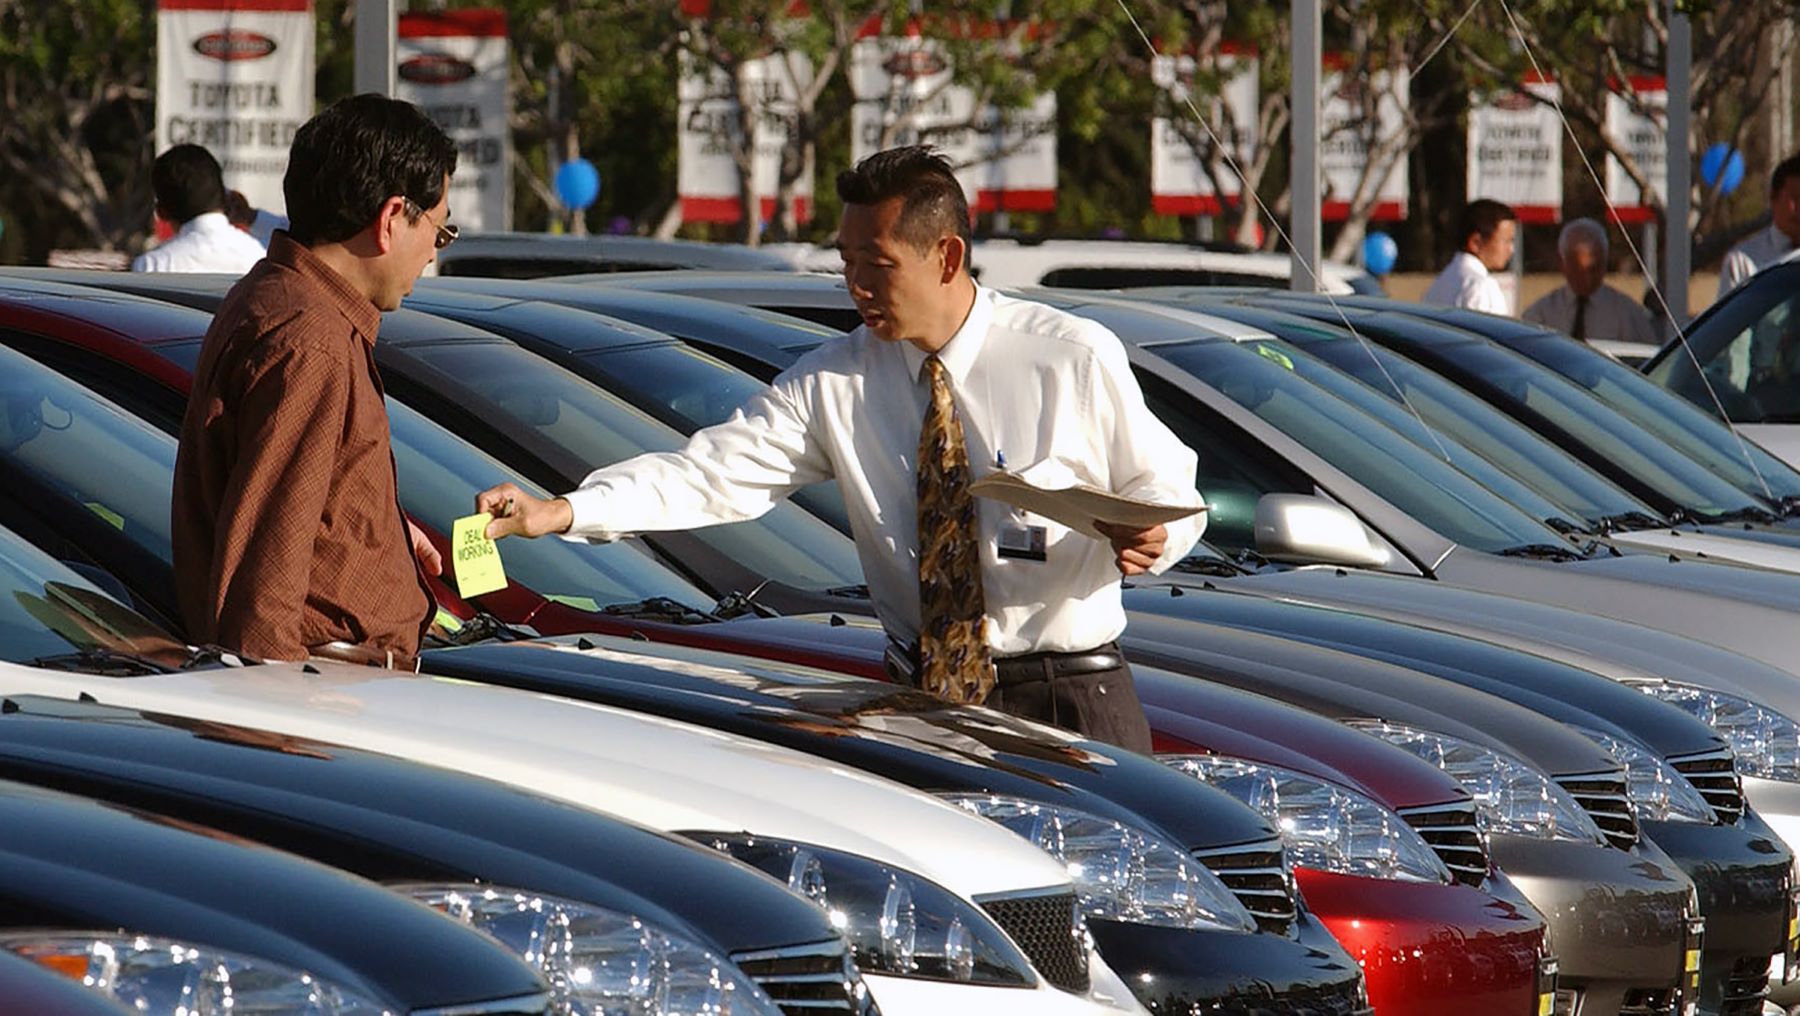 A car salesman and auto expert assists a customer in the lot of a Toyota dealership in El Monte, California